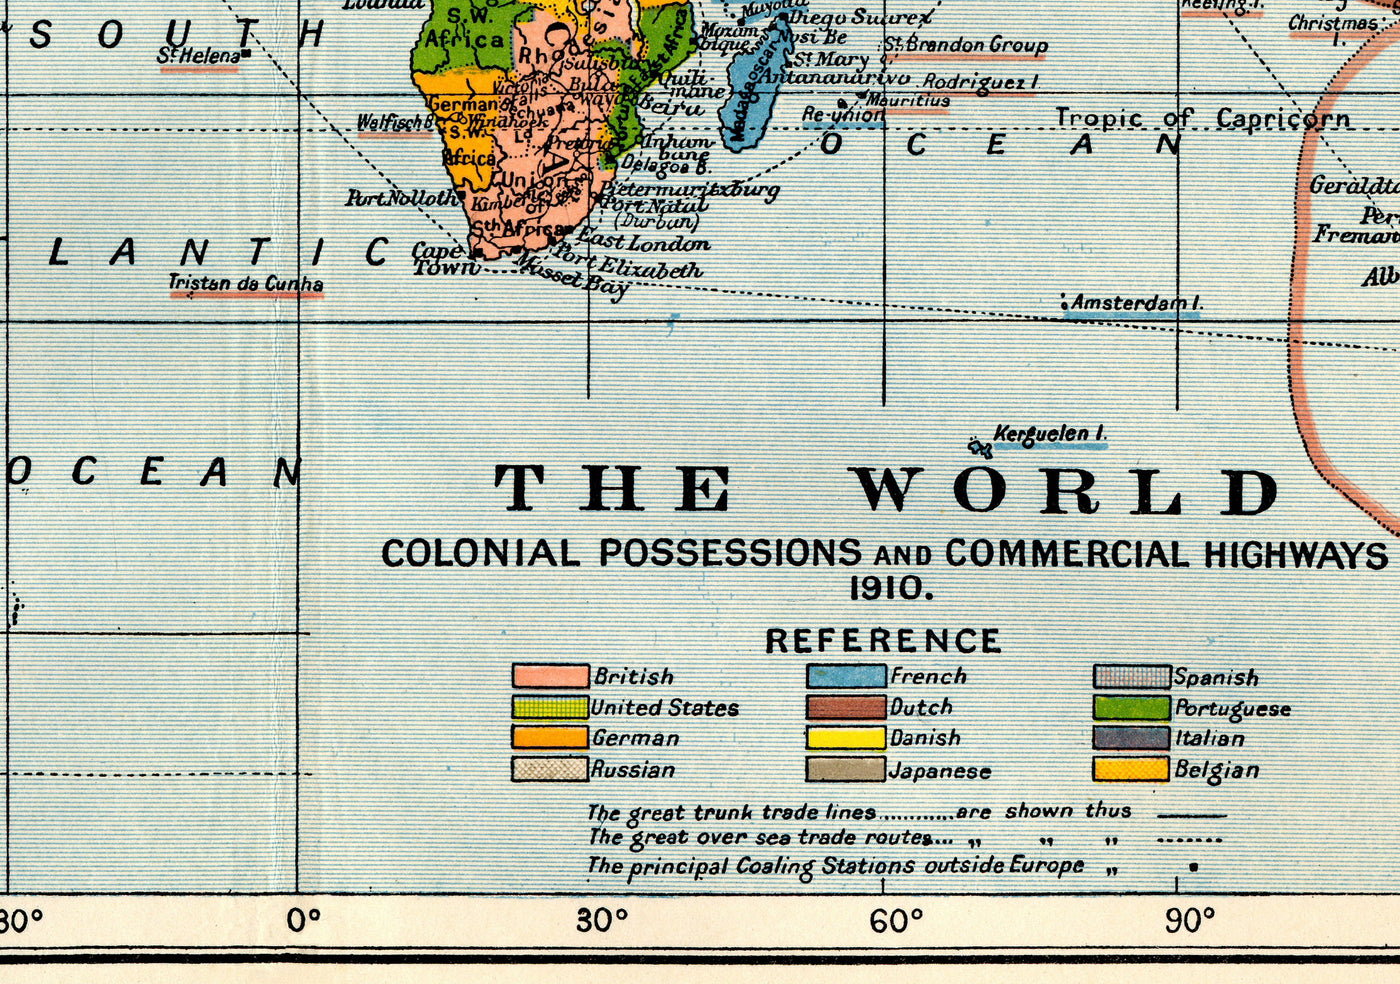 Old Colonial World Map, 1912 by Cambridge Publishing - British Empire, French Empire, Dutch Empire, Chinese Empire, Spanish Empire